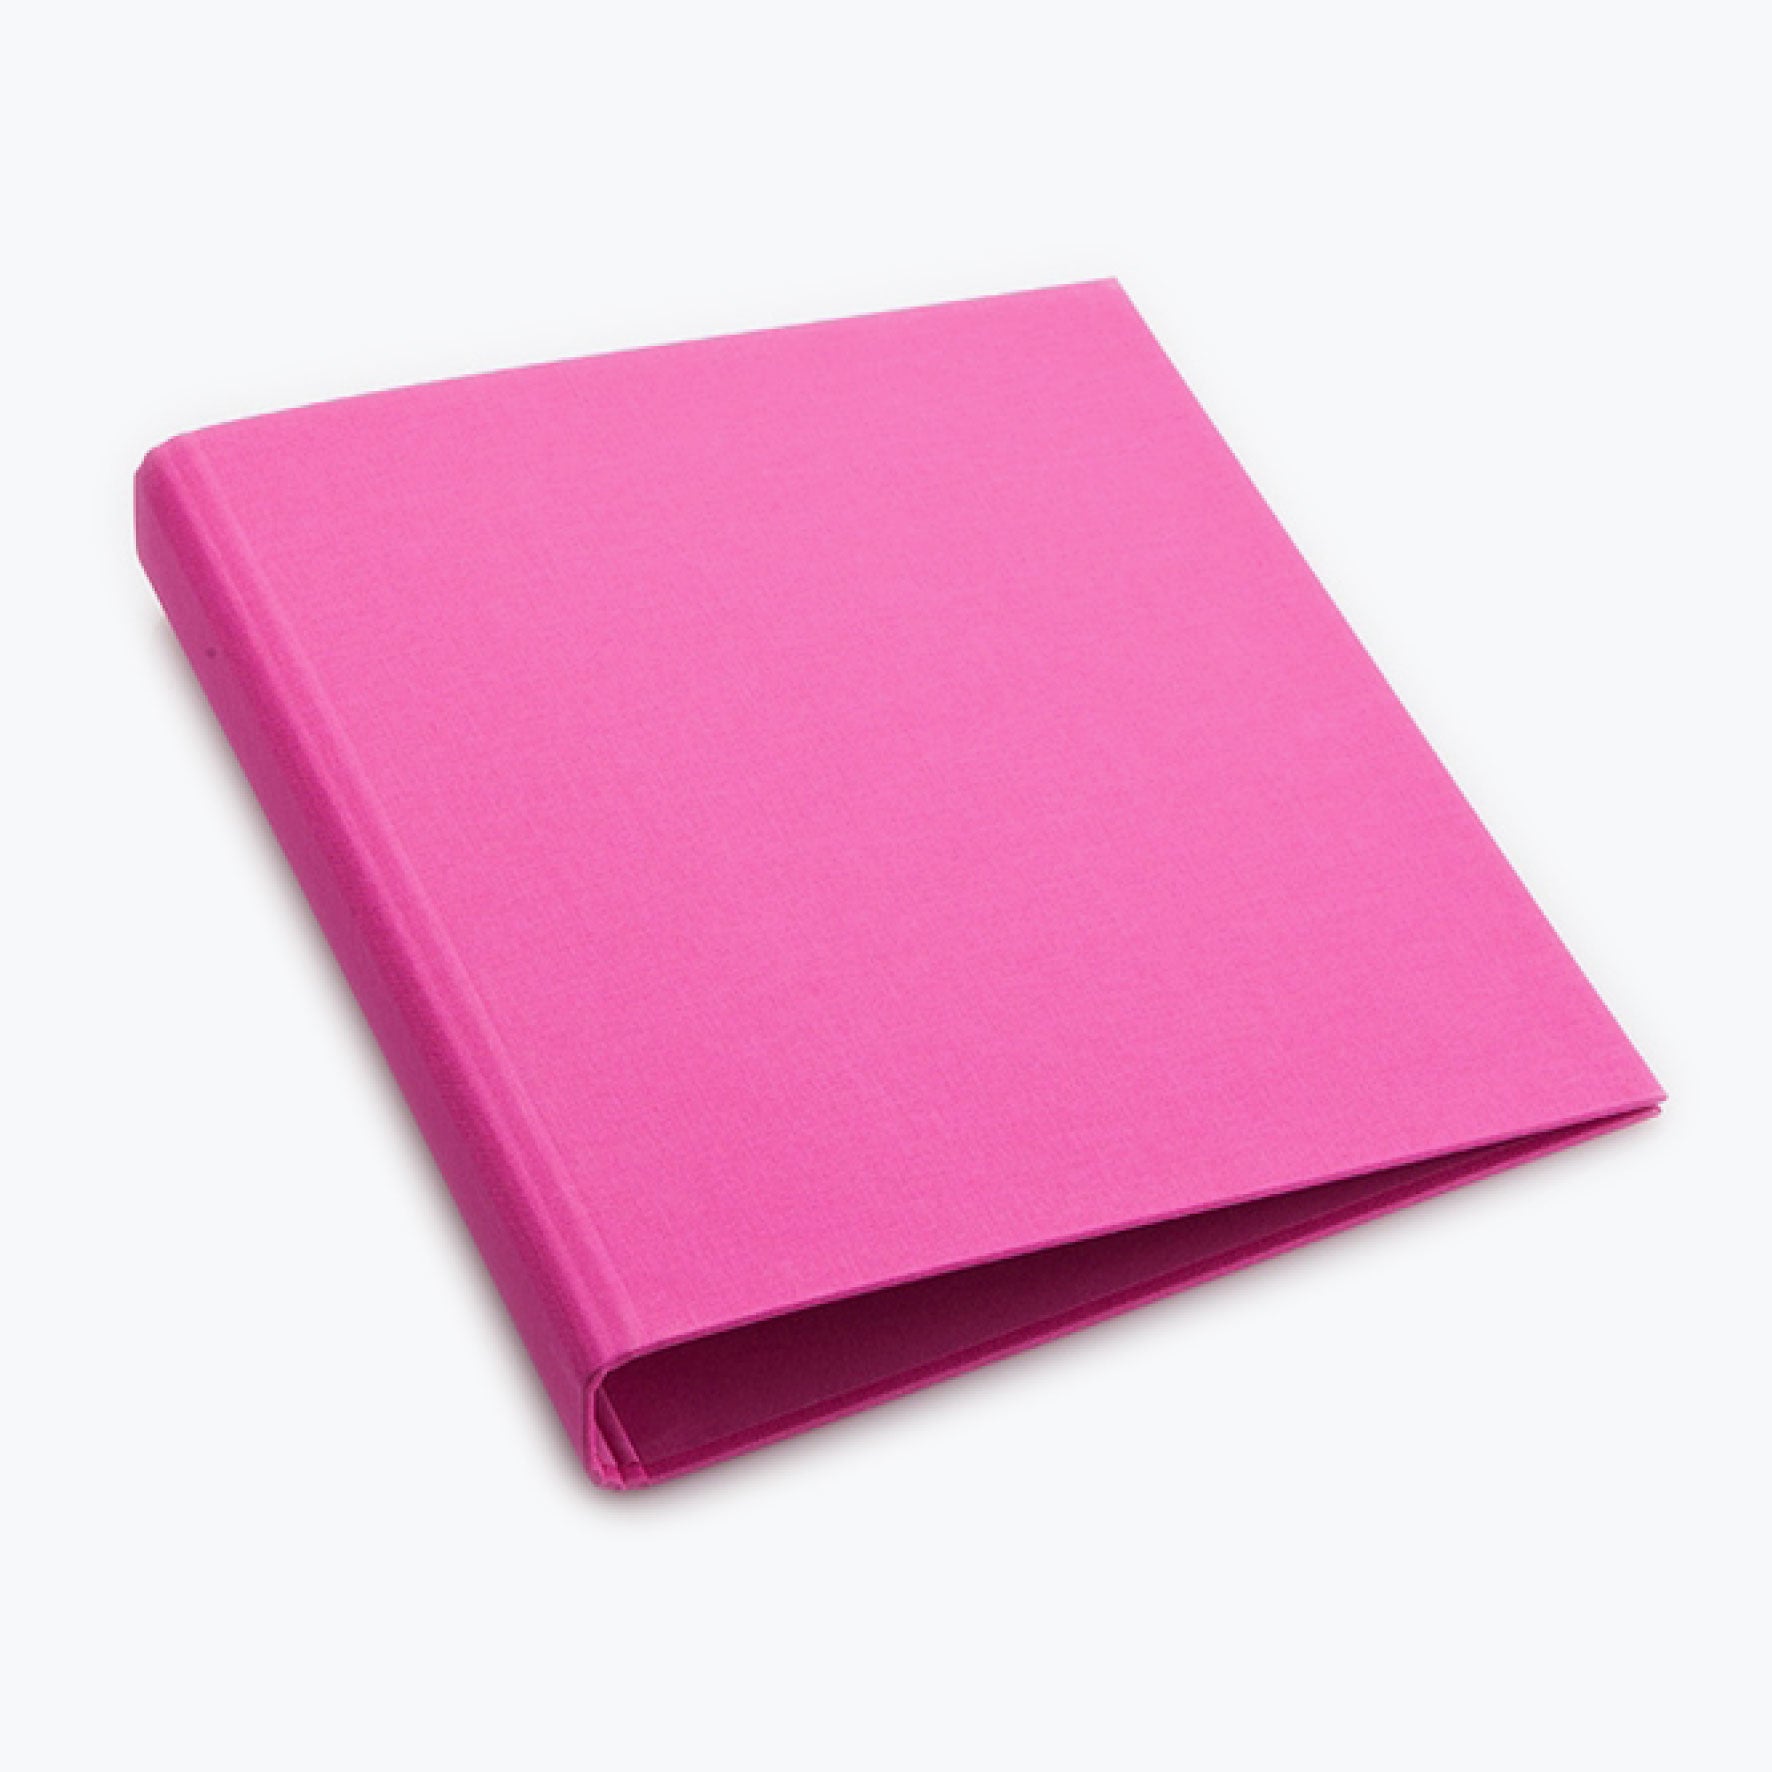 Bookbinders Design - Cloth Ringbinder - A3 - Pink <Outgoing>